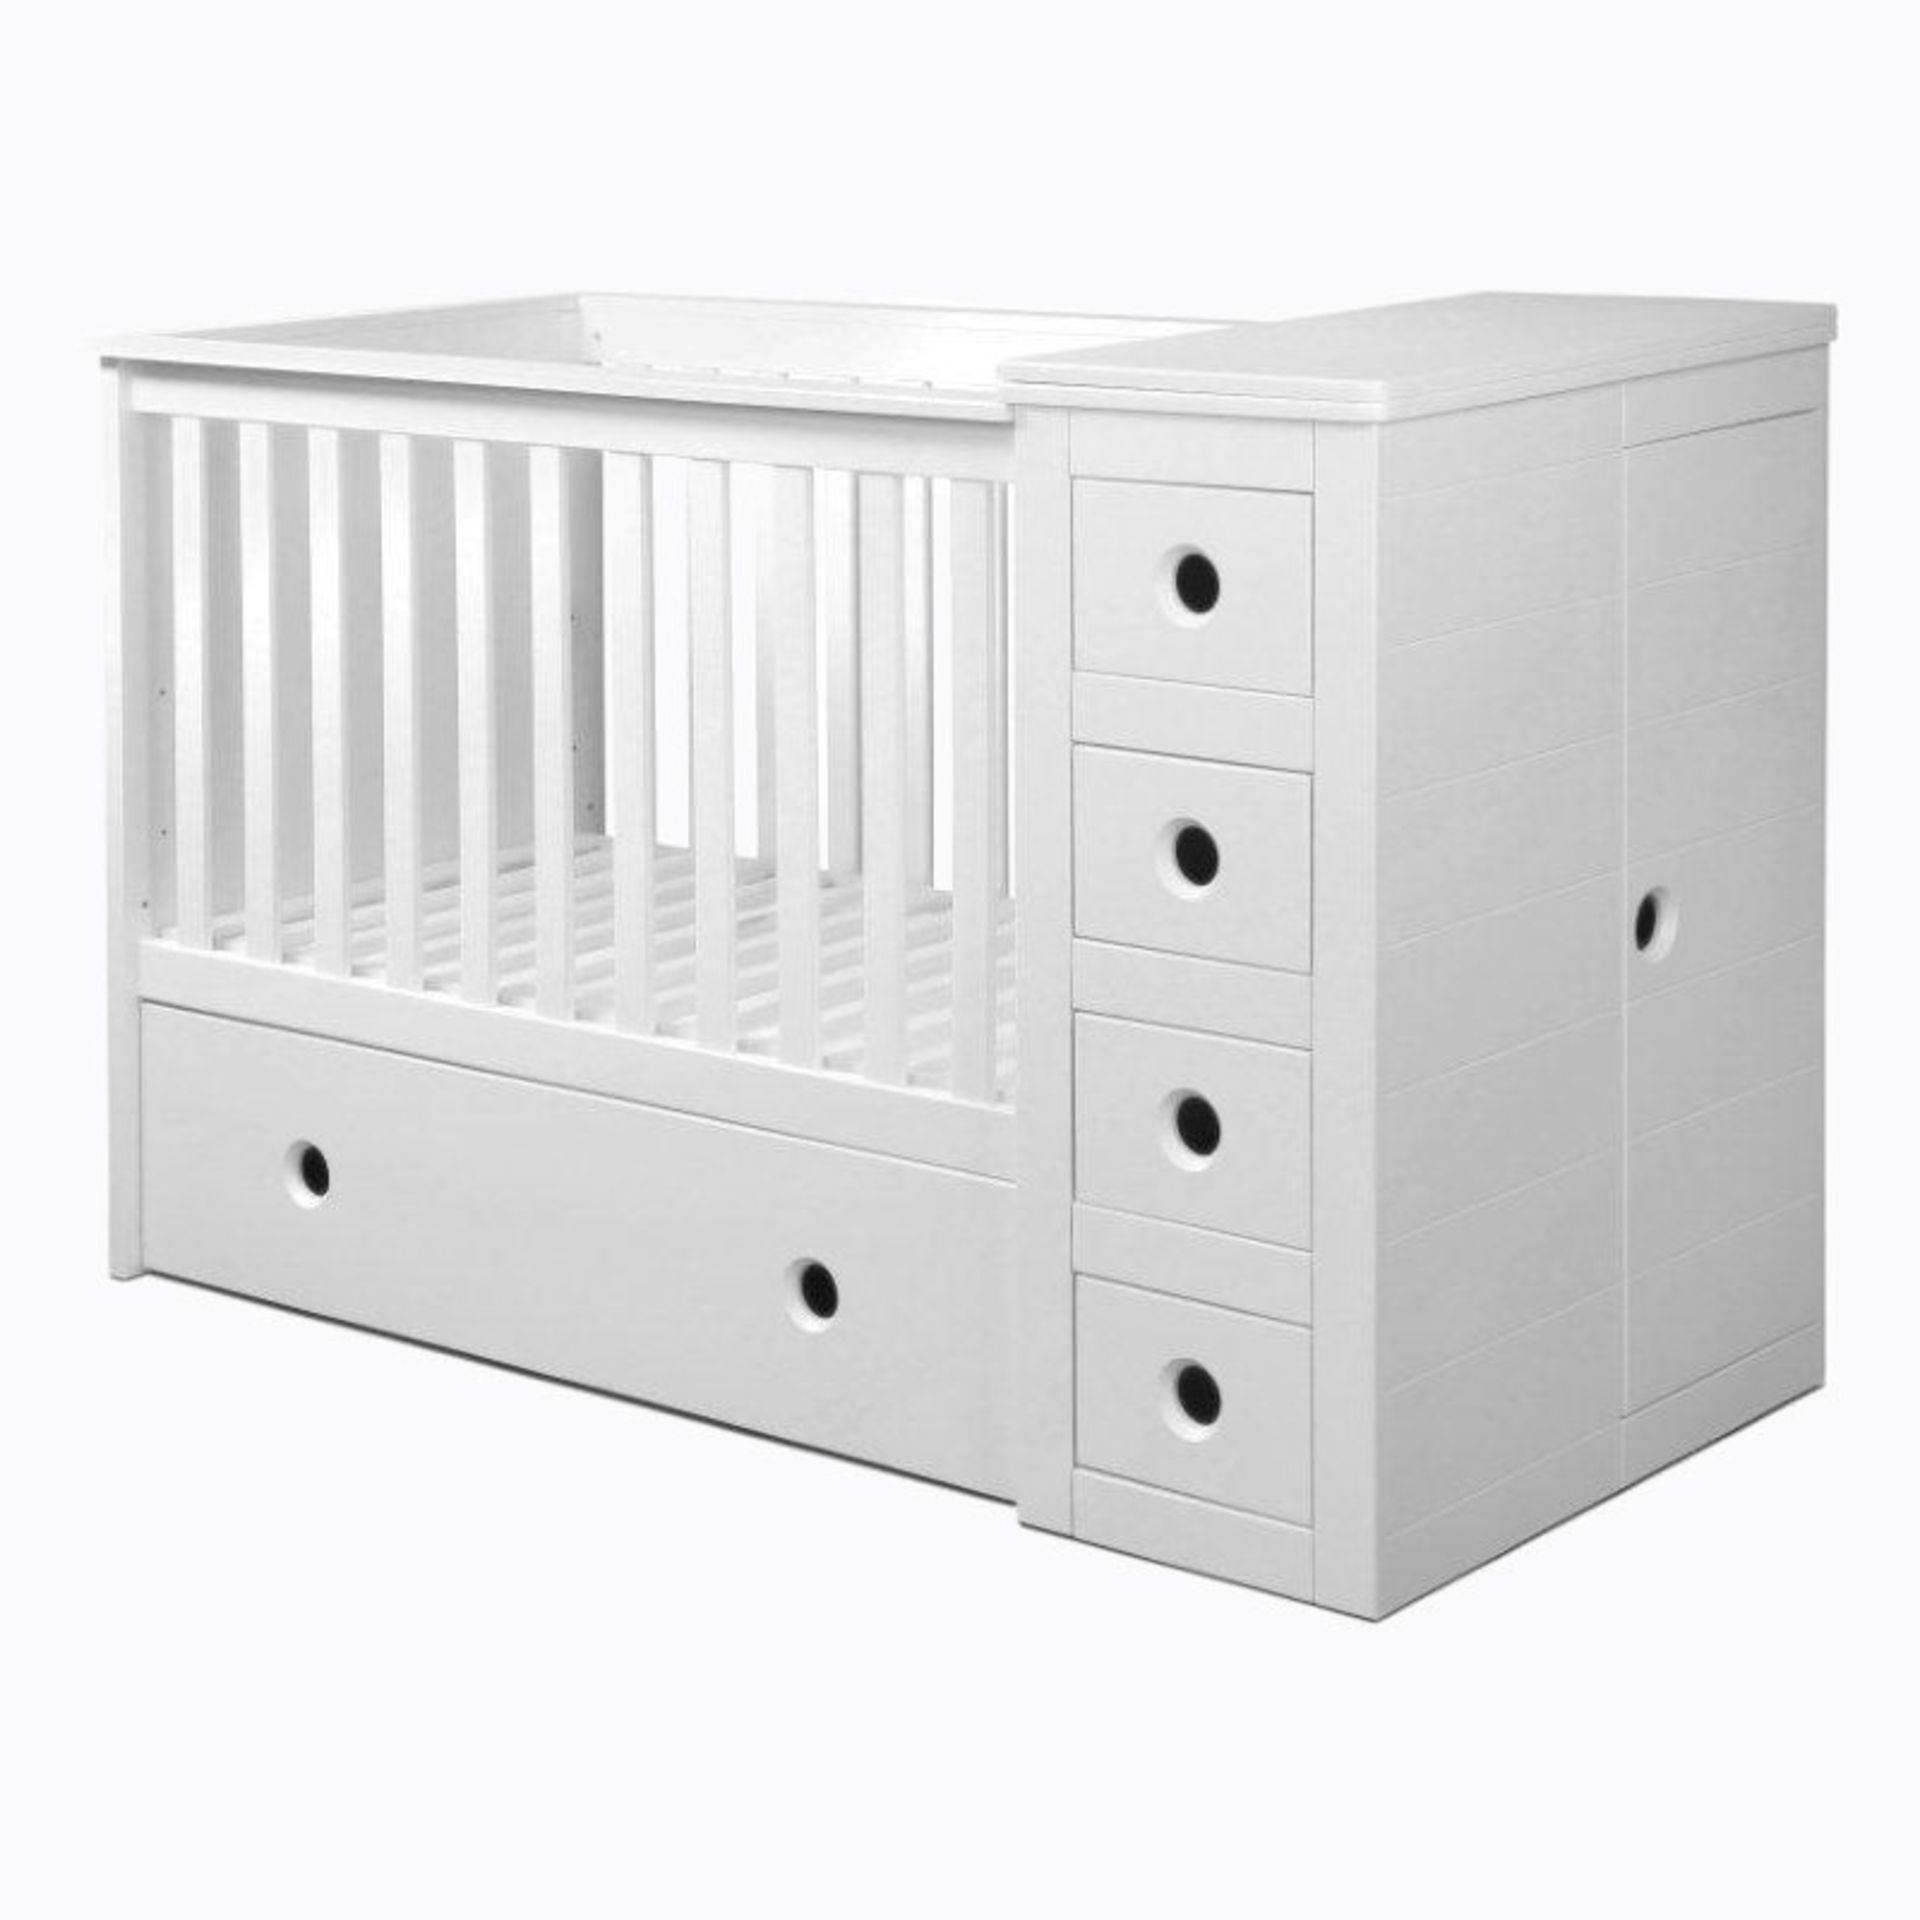 1 KIDDIC 3-IN-1 COT BED & CHEST OF DRAWERS WITH DRESSER & MATTRESS RRP Â£499